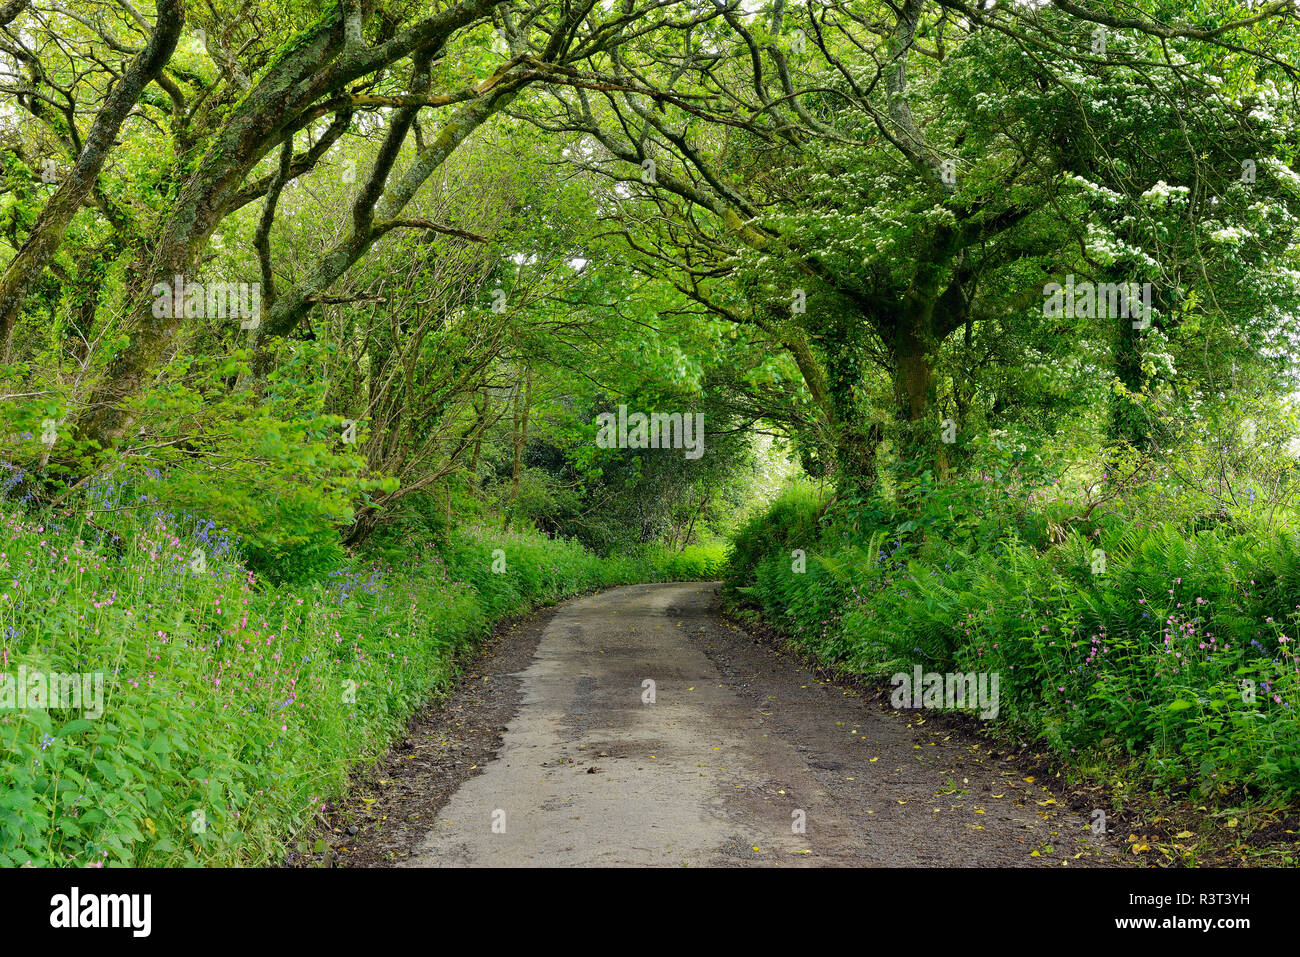 United Kingdom, England, Cornwall, Narrow country road treelined in forest Stock Photo